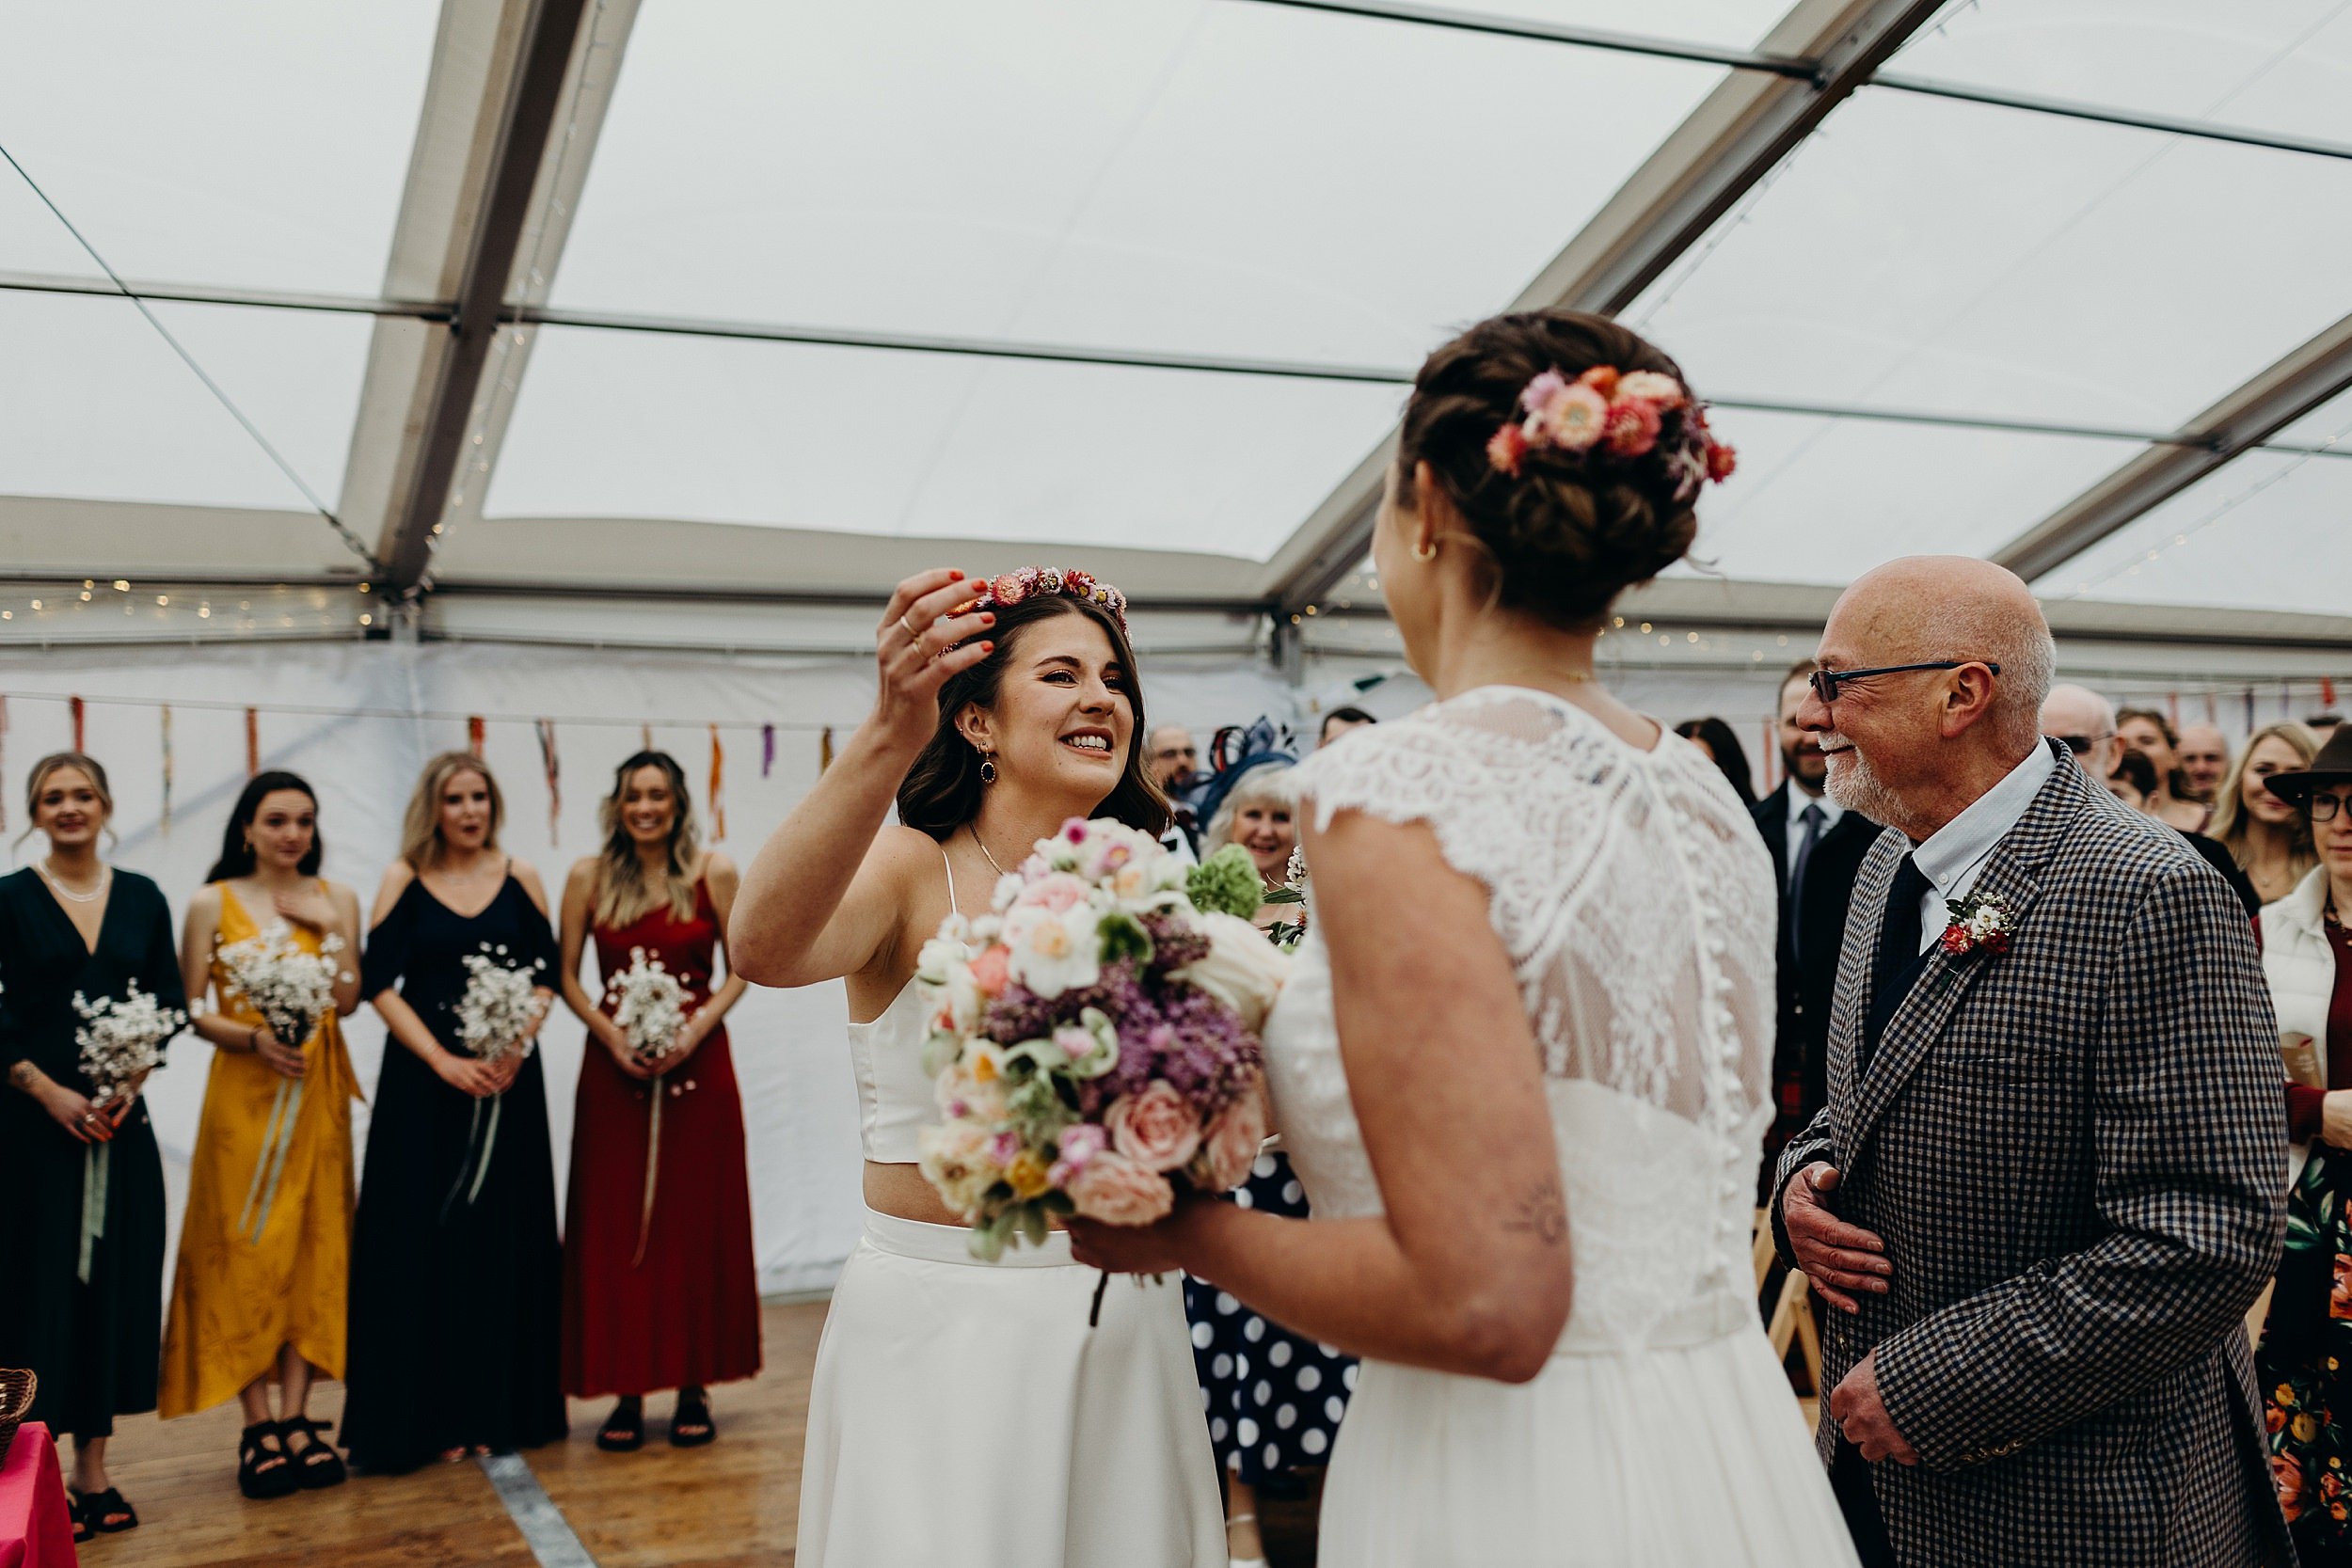 the two brides greet each other as bridesmaids and guests look on before their harvest moon wedding in dunbar in scotland